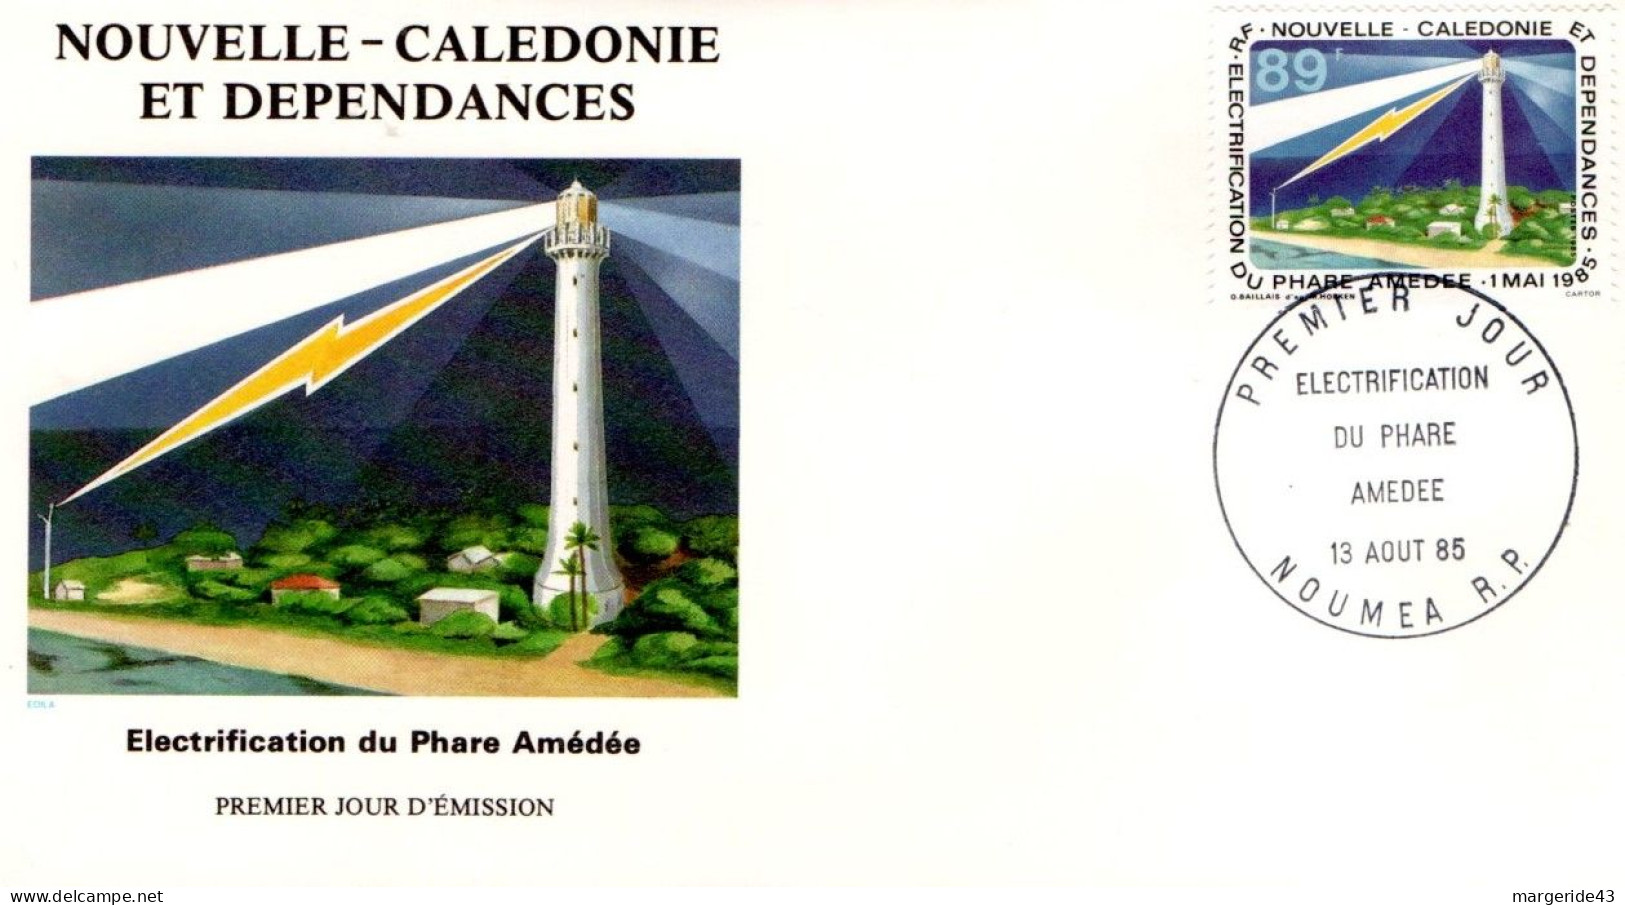 NOUVELLE CALEDONIE FDC 1985 ELECTRIFICATION PHARE AMEDEE - FDC